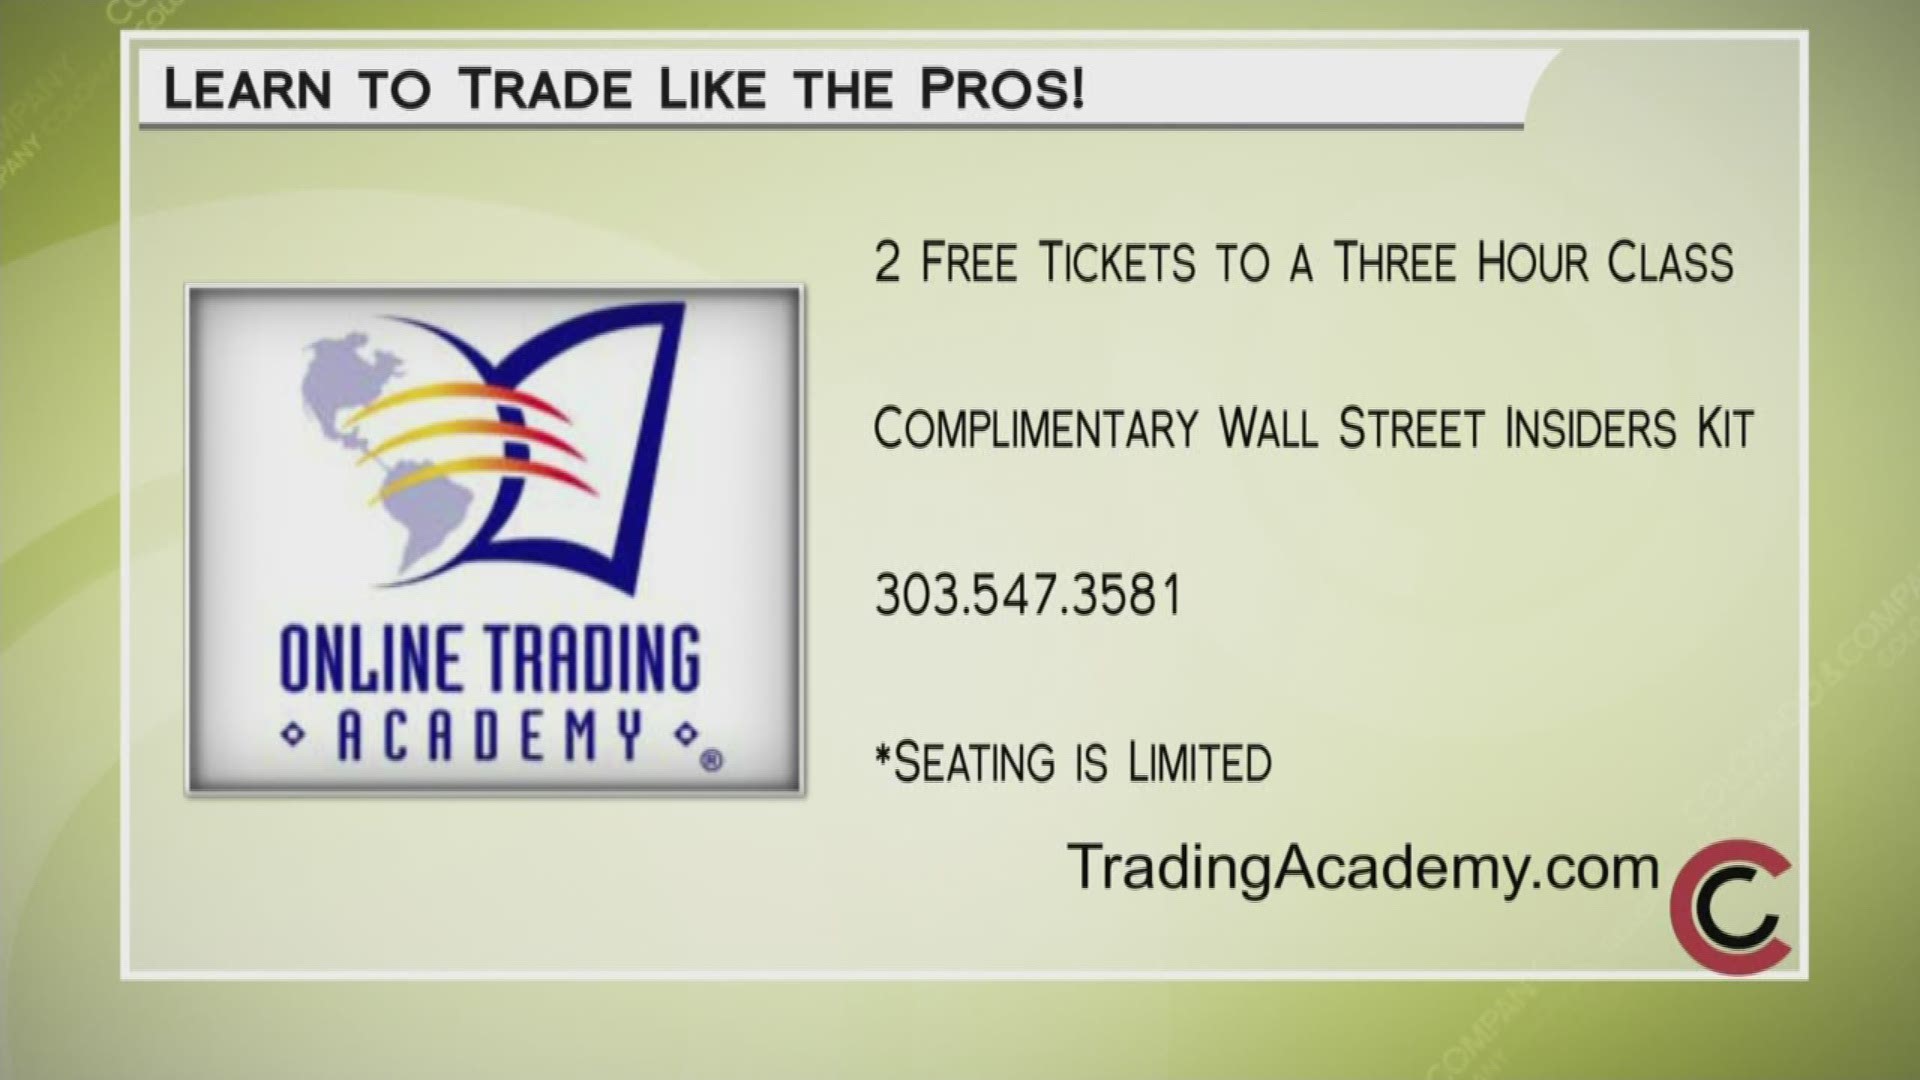 Call 303.547.3581 or visit TradingAcademy.com to sign up for a free 3-hour class. You'll also get free powerful home study courses for attending. Get started today!